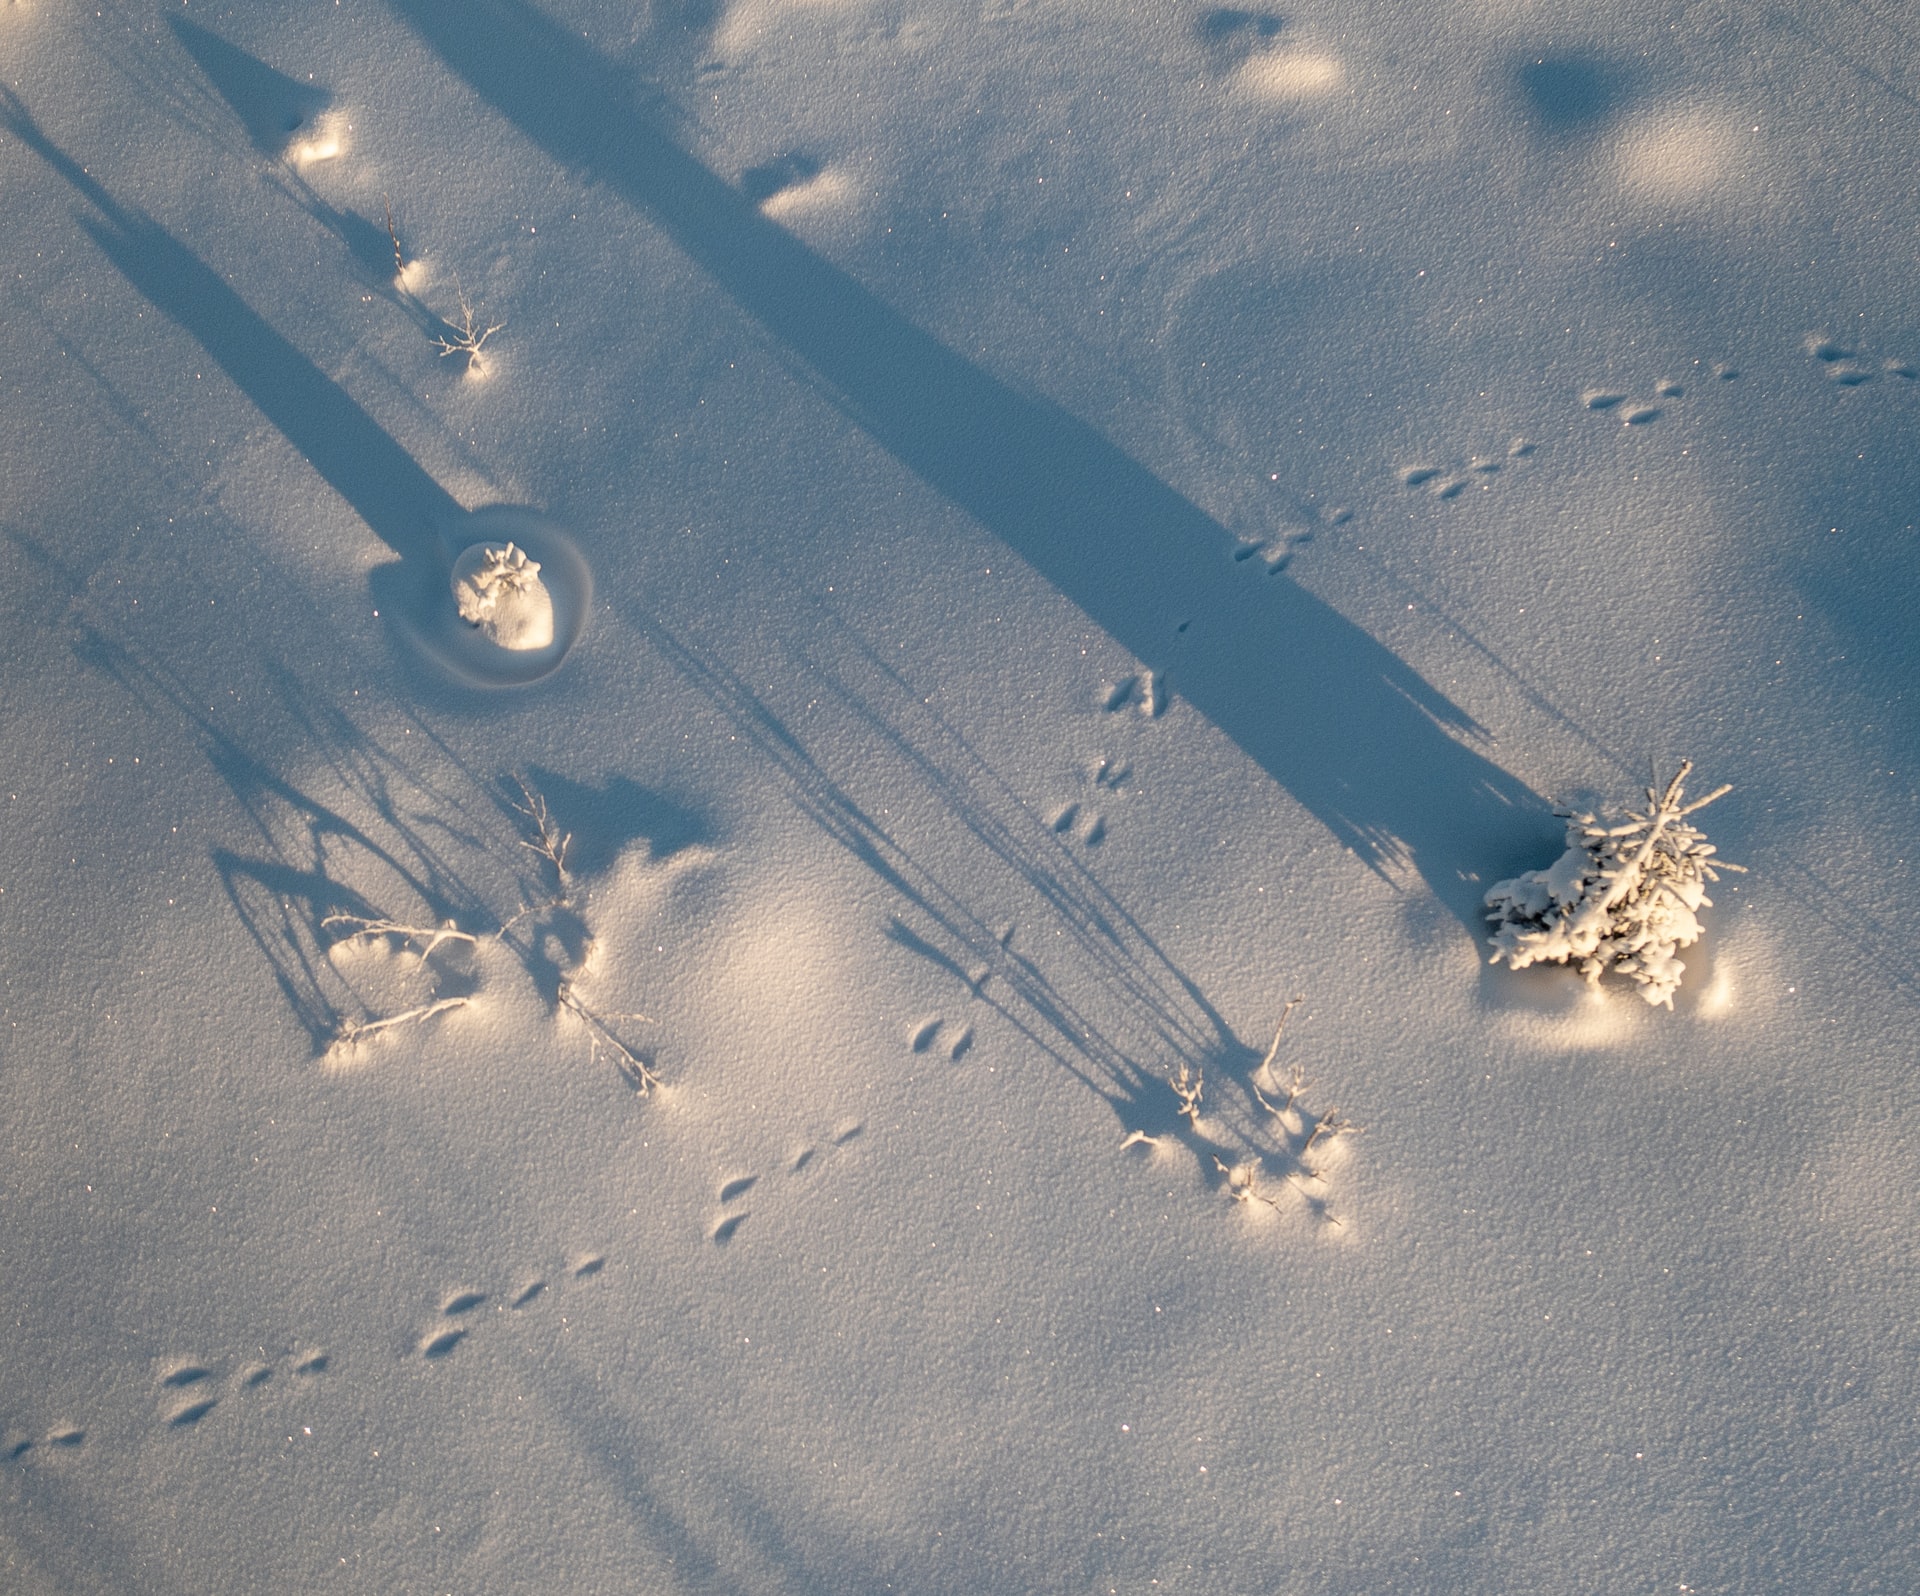 snowshoe hare tracks in the snow